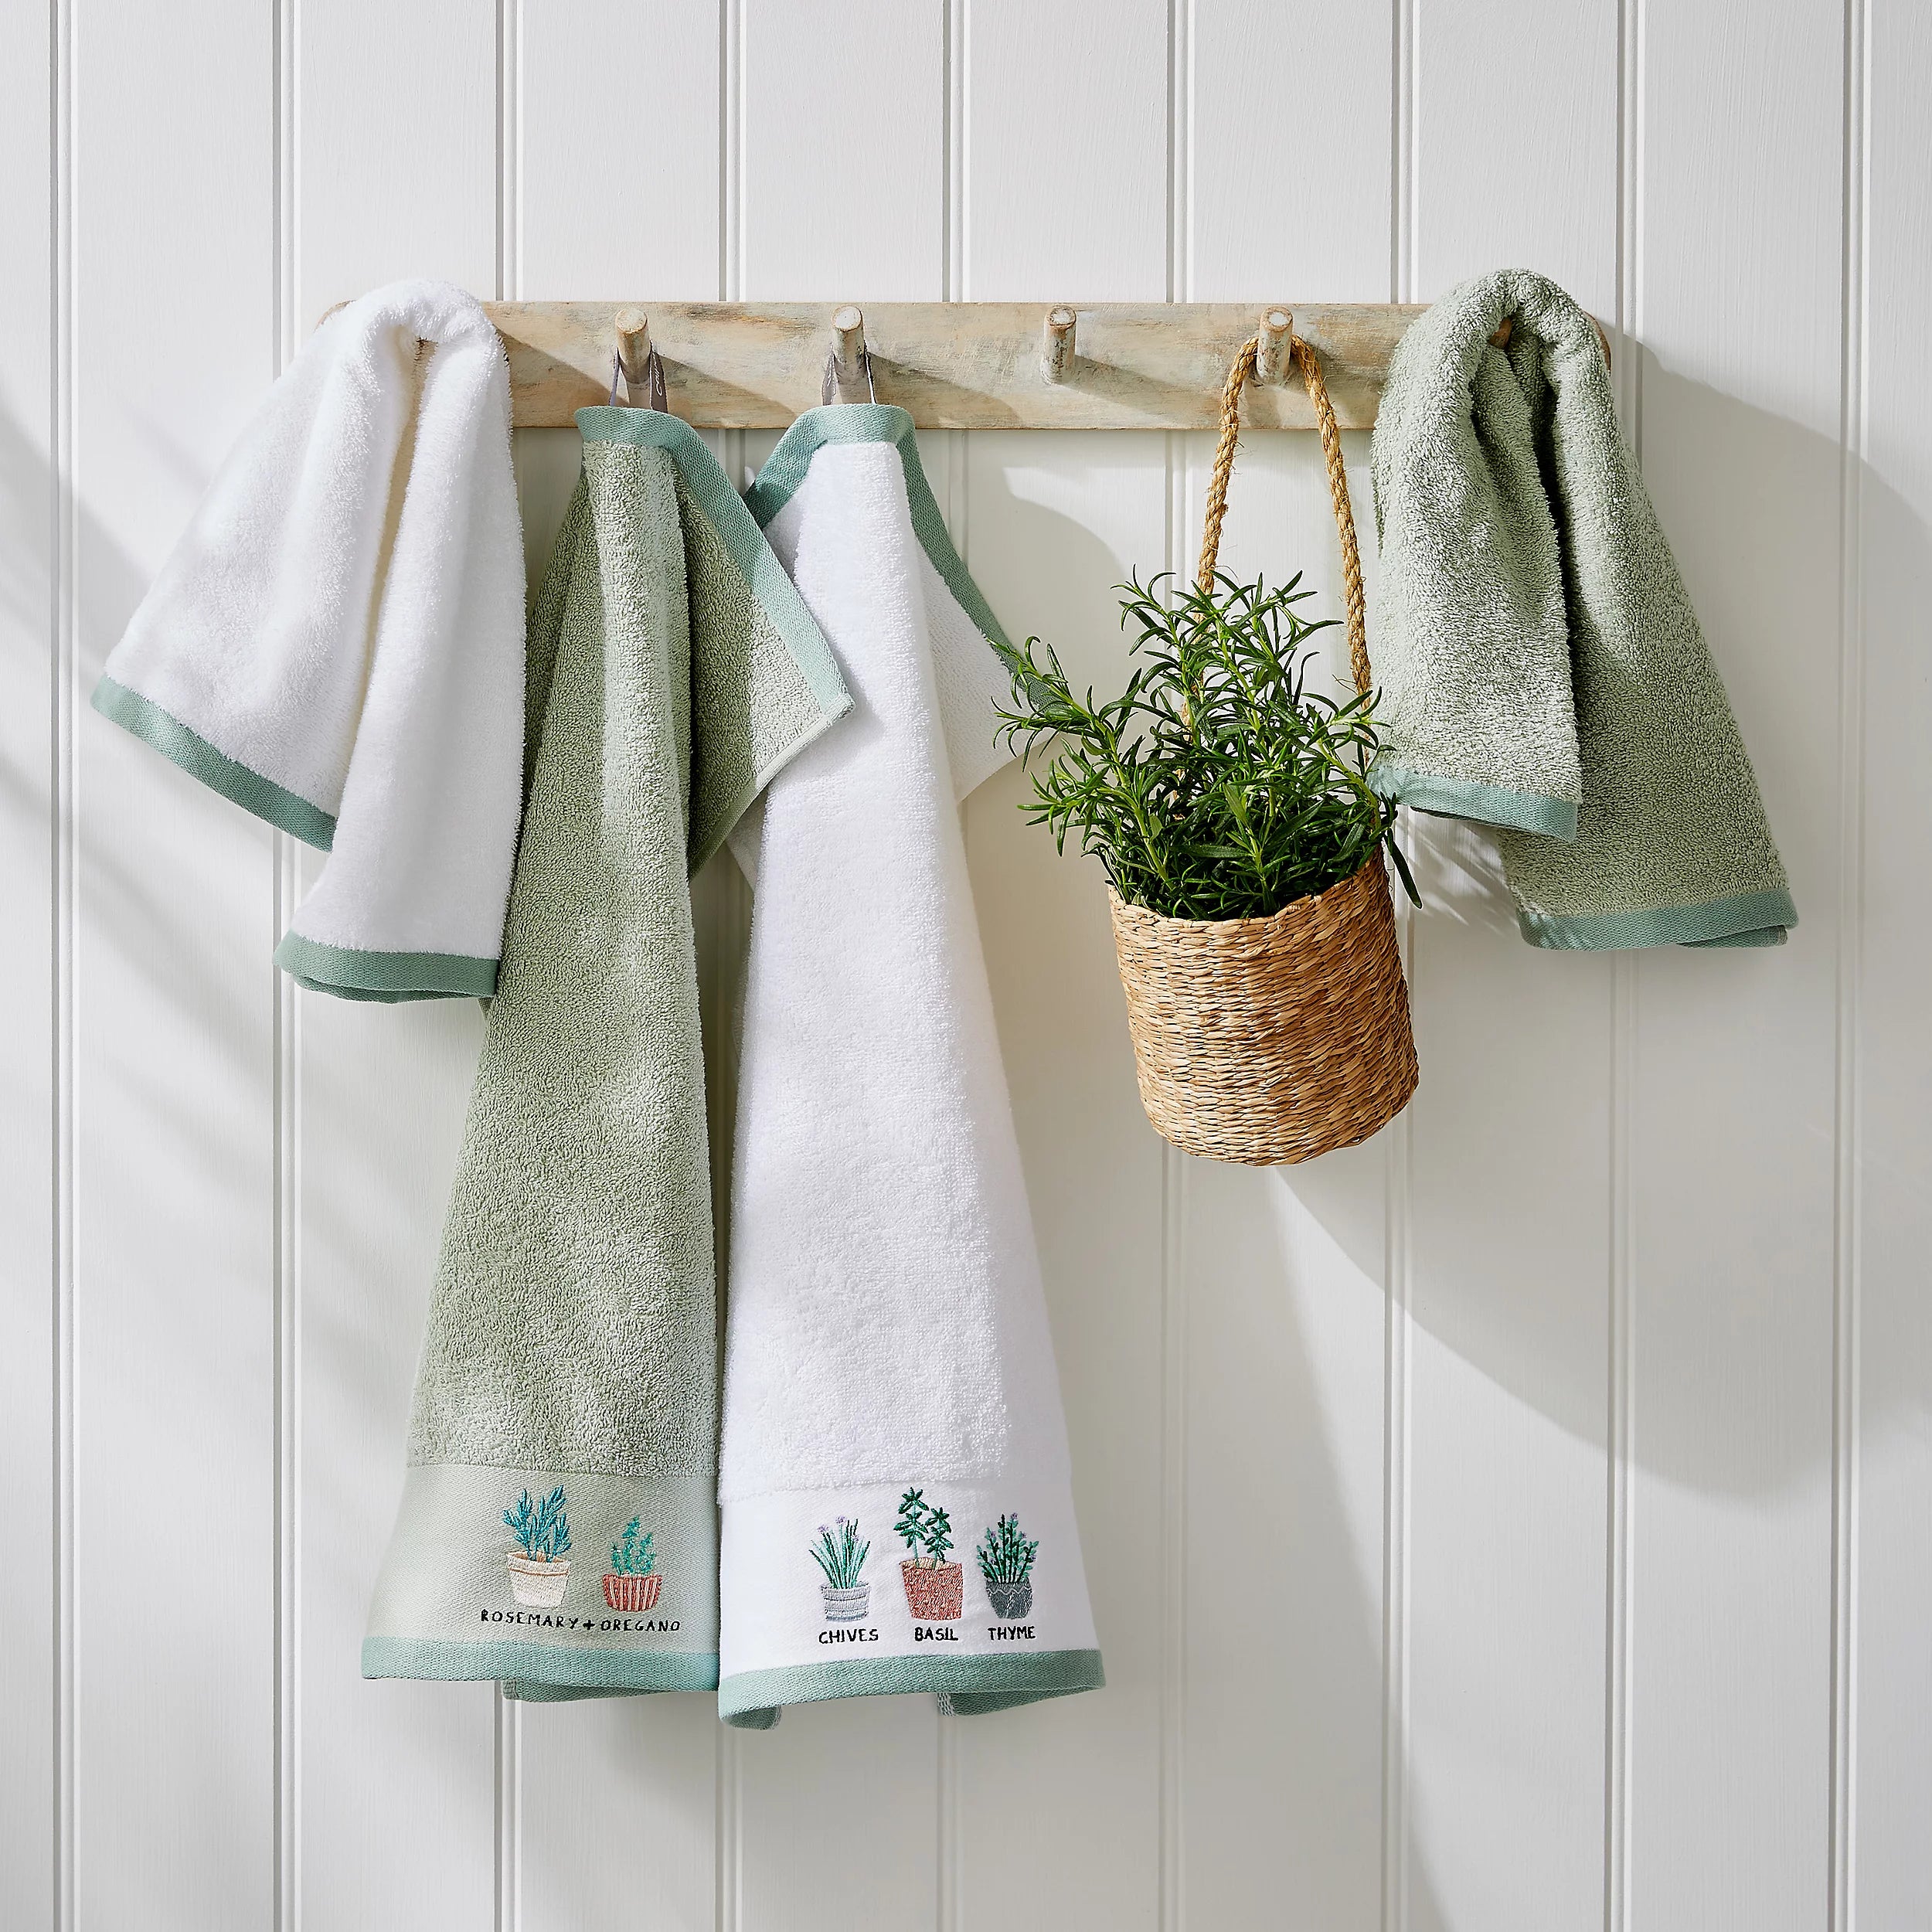 Mixed Herbs Pack of 4, Tea Towels (Green and White)